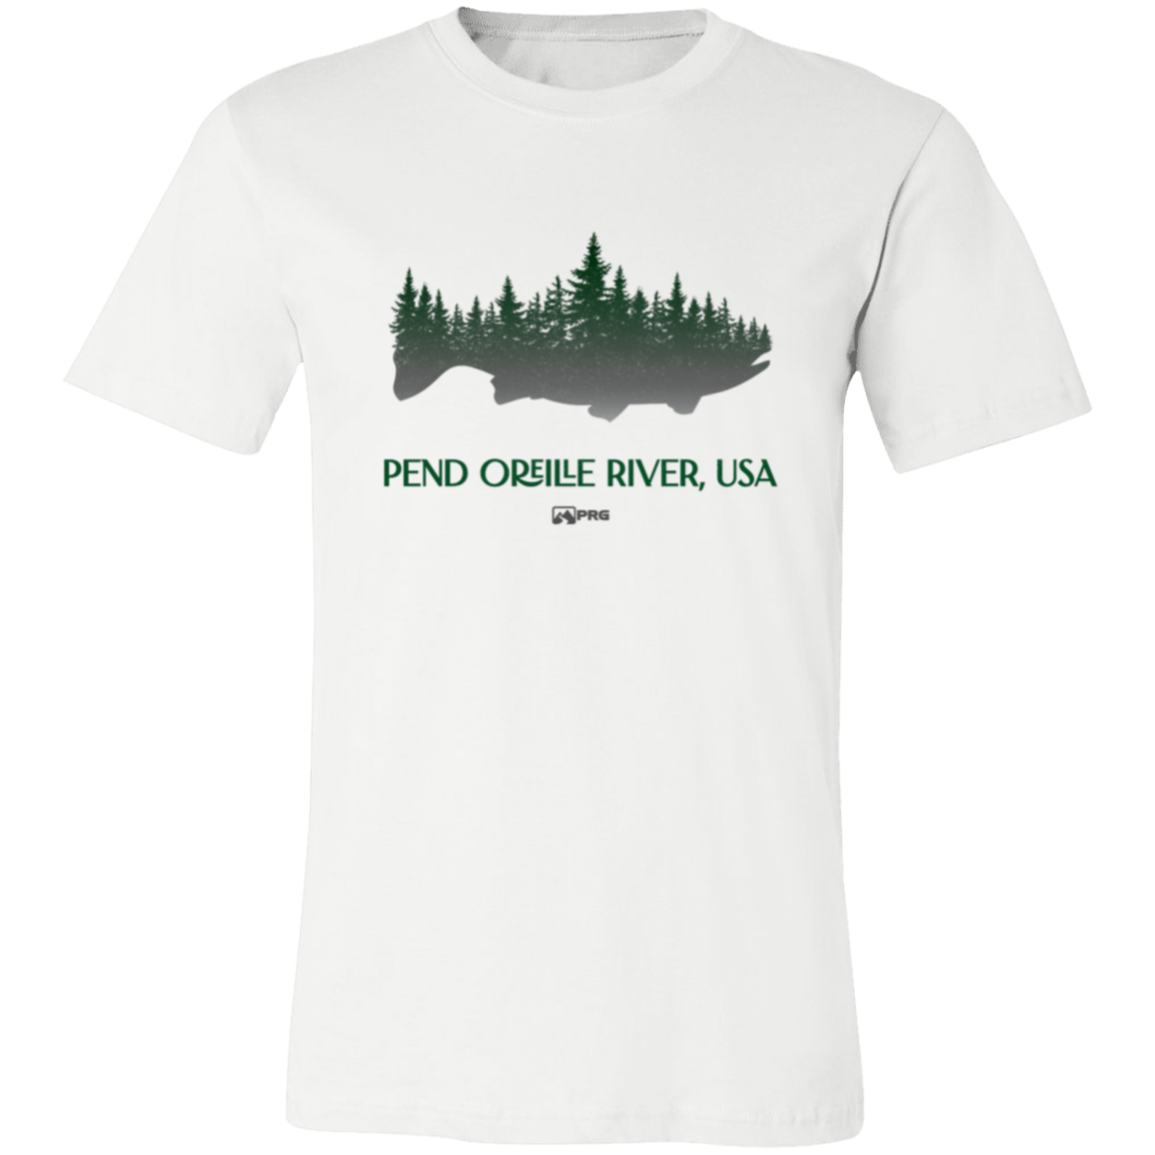 Forests & Fish - Shirt